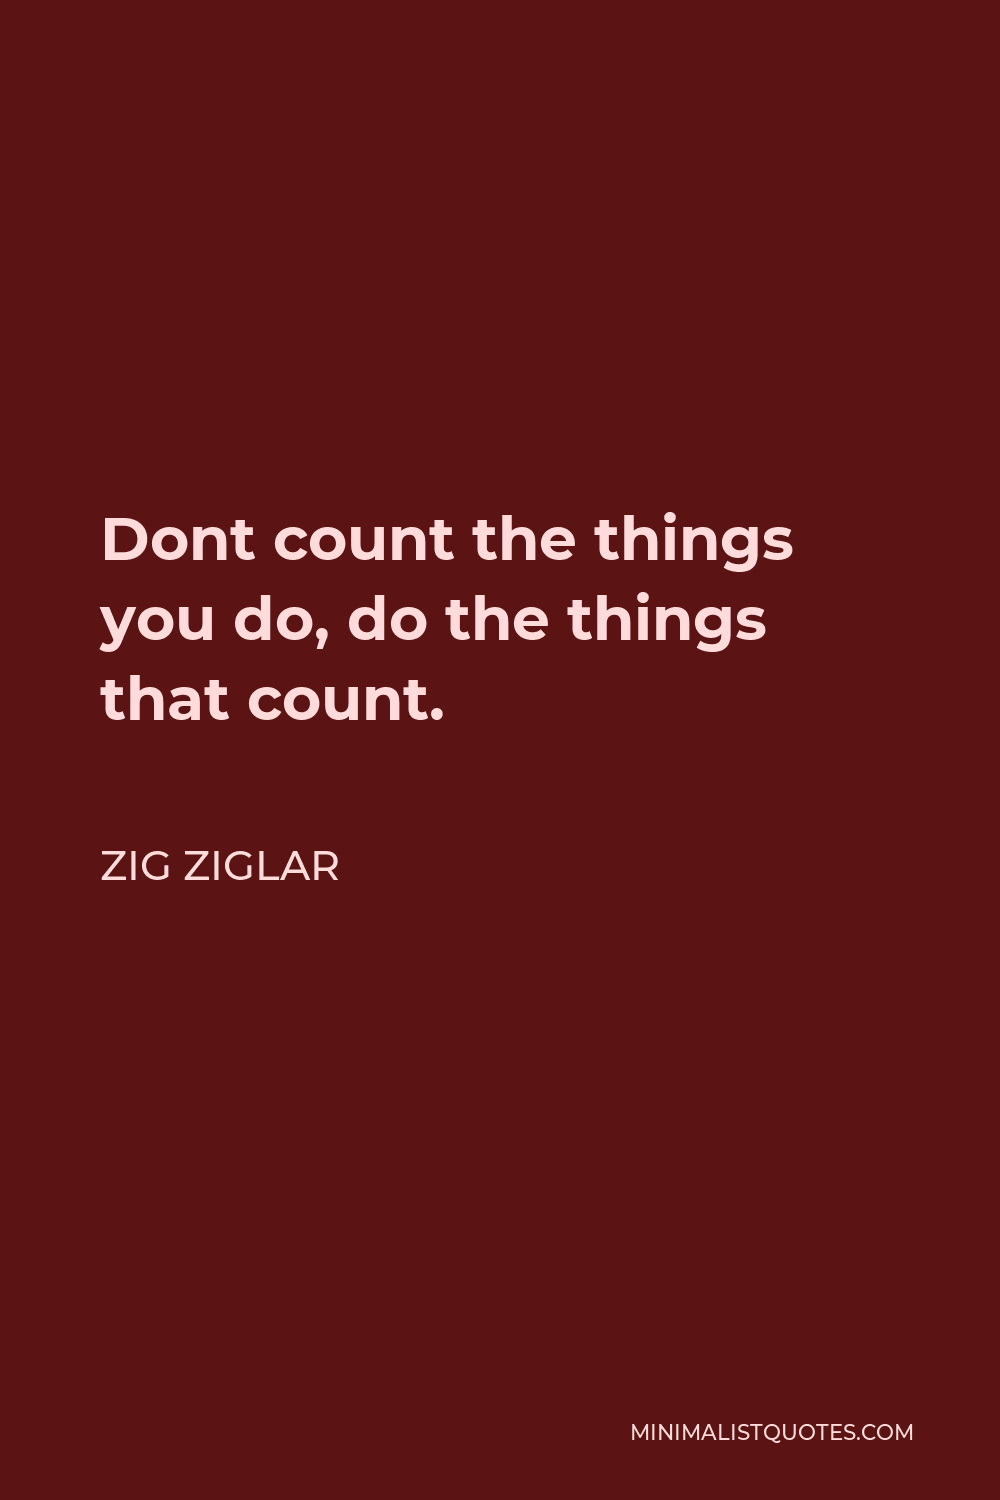 Zig Ziglar Quote - Dont count the things you do, do the things that count.